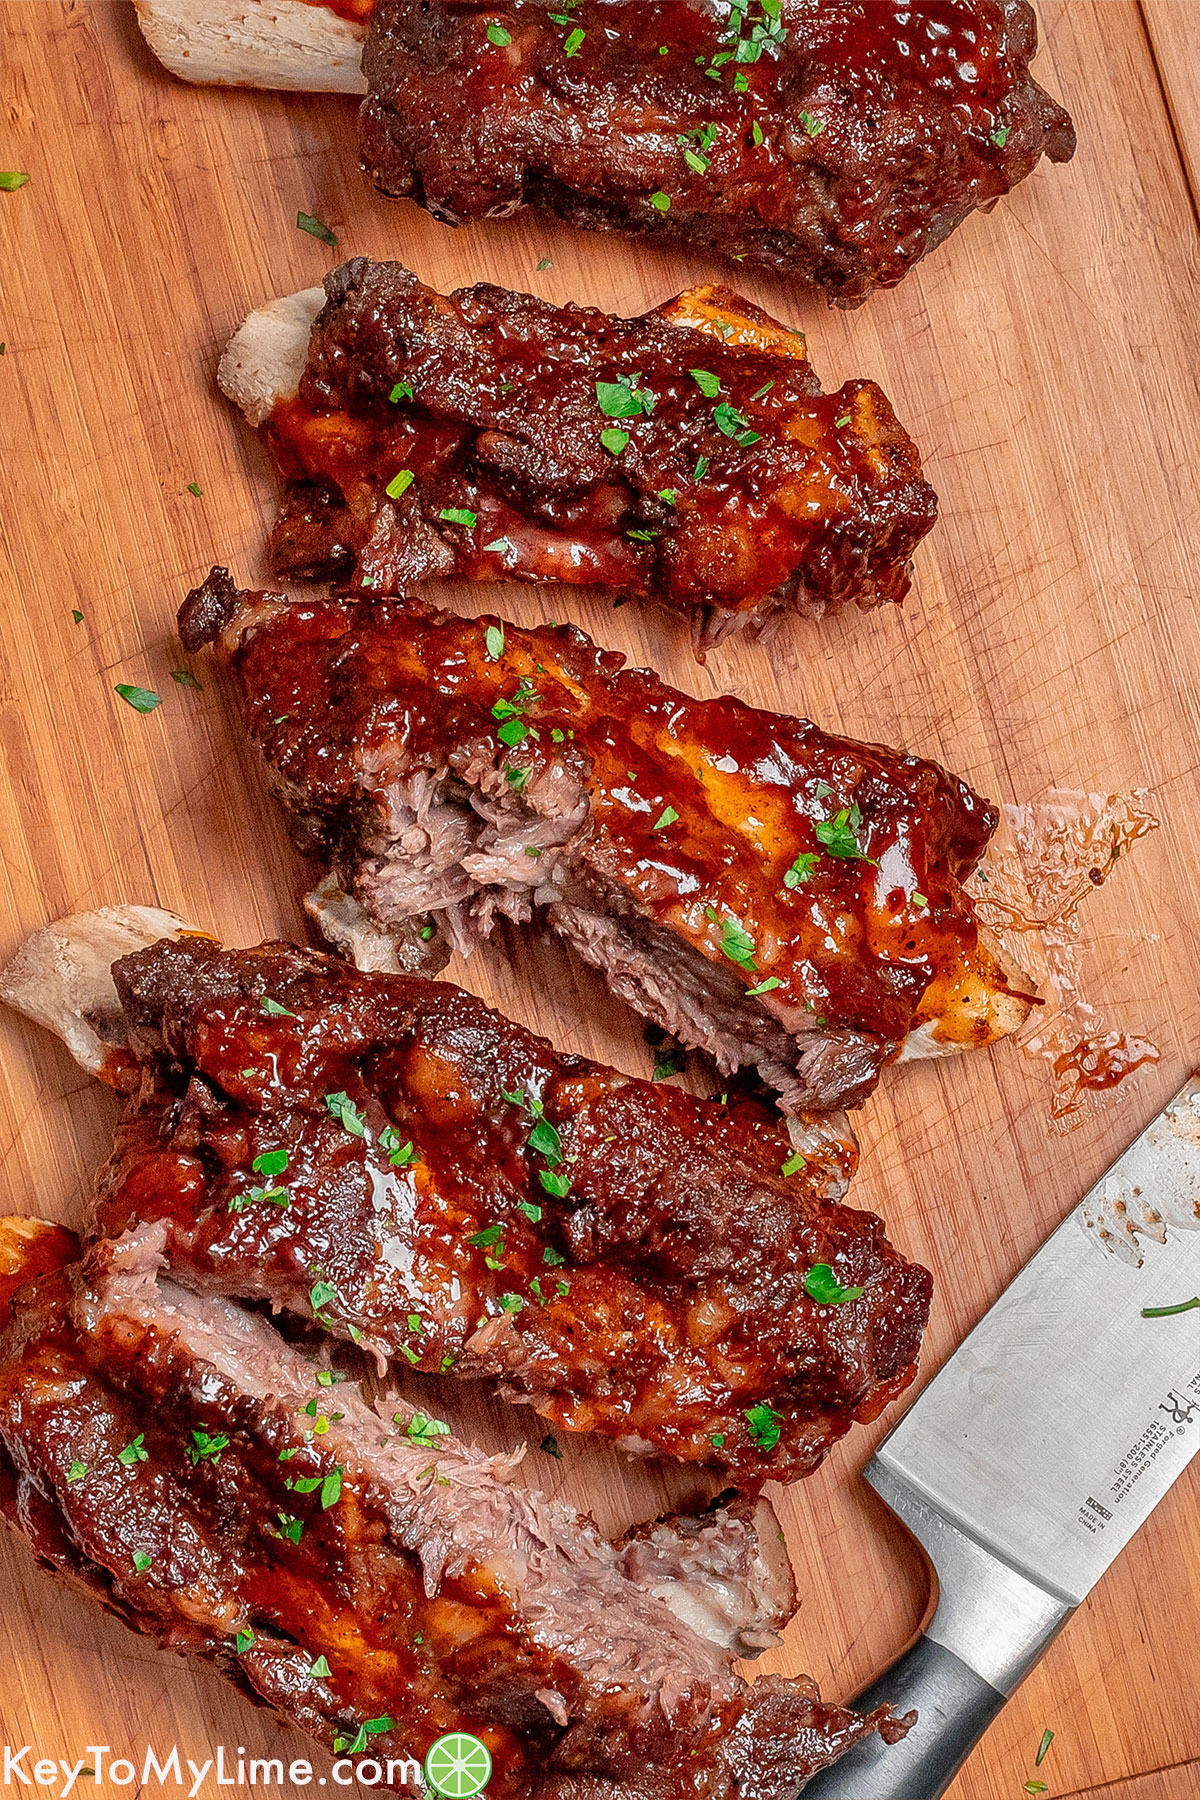 An overhead image of ribs on a cutting board.